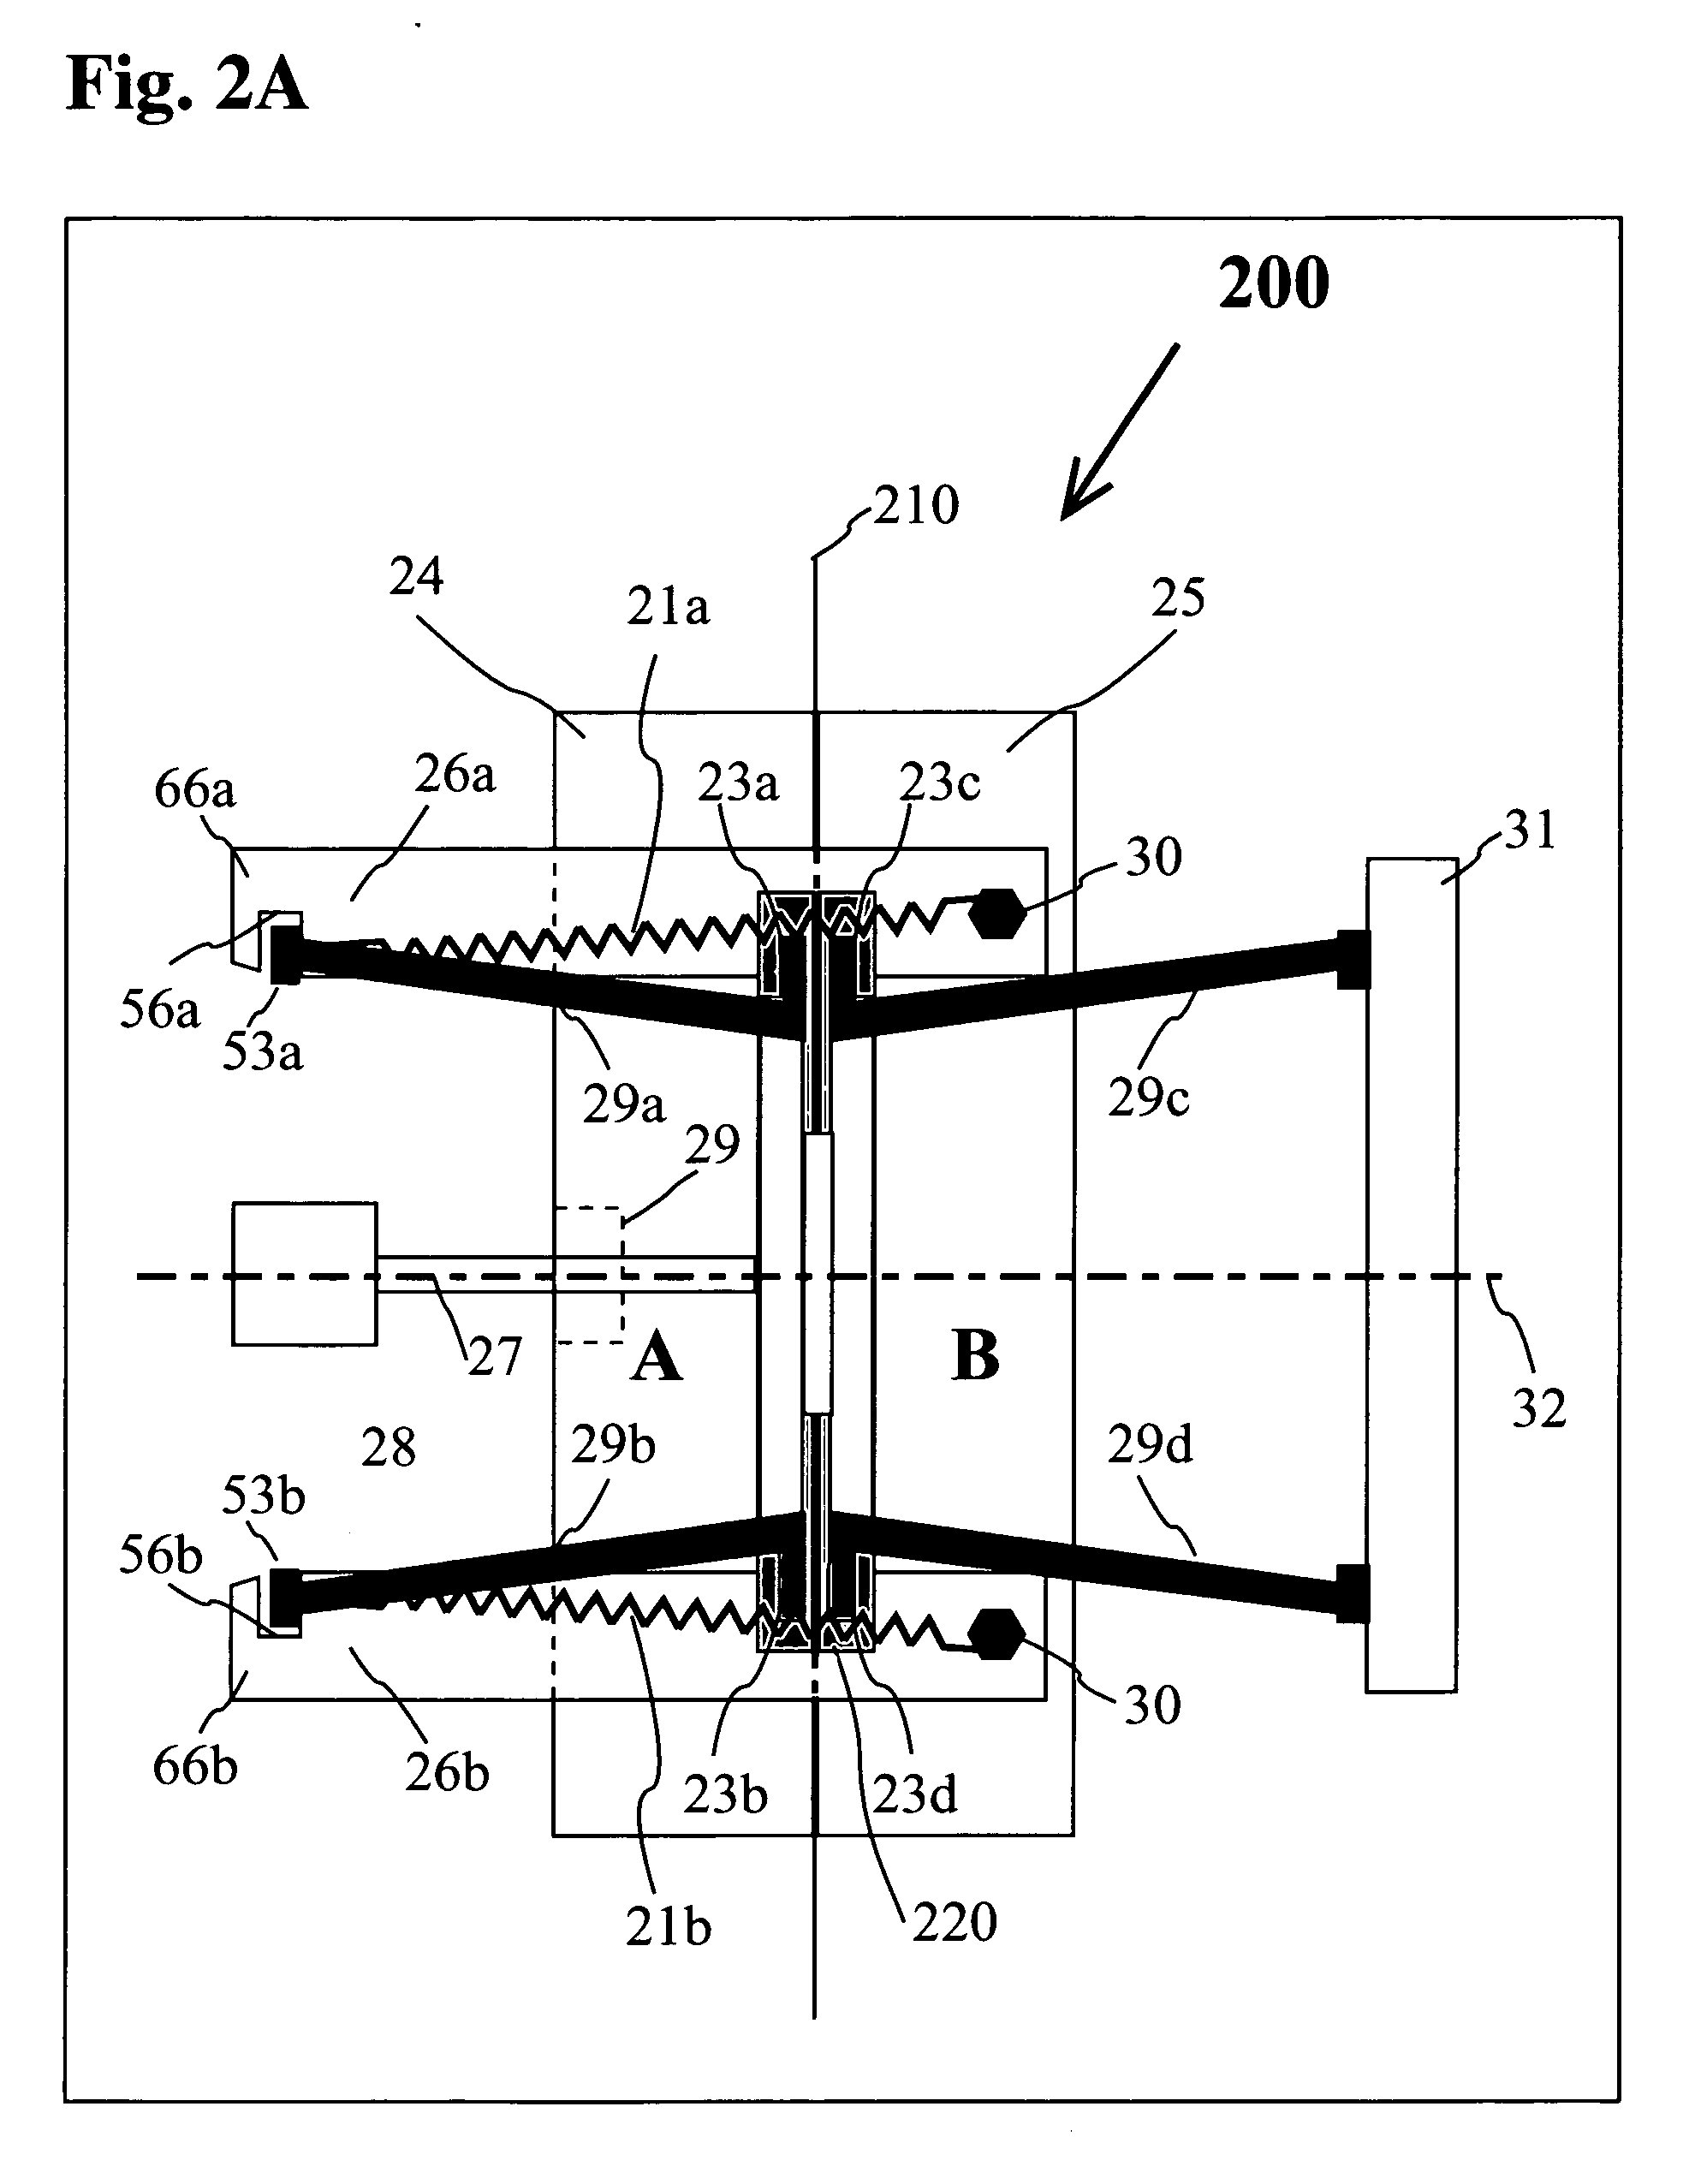 Polymeric injection mold with retractable bars for producing re-entrant molded surfaces